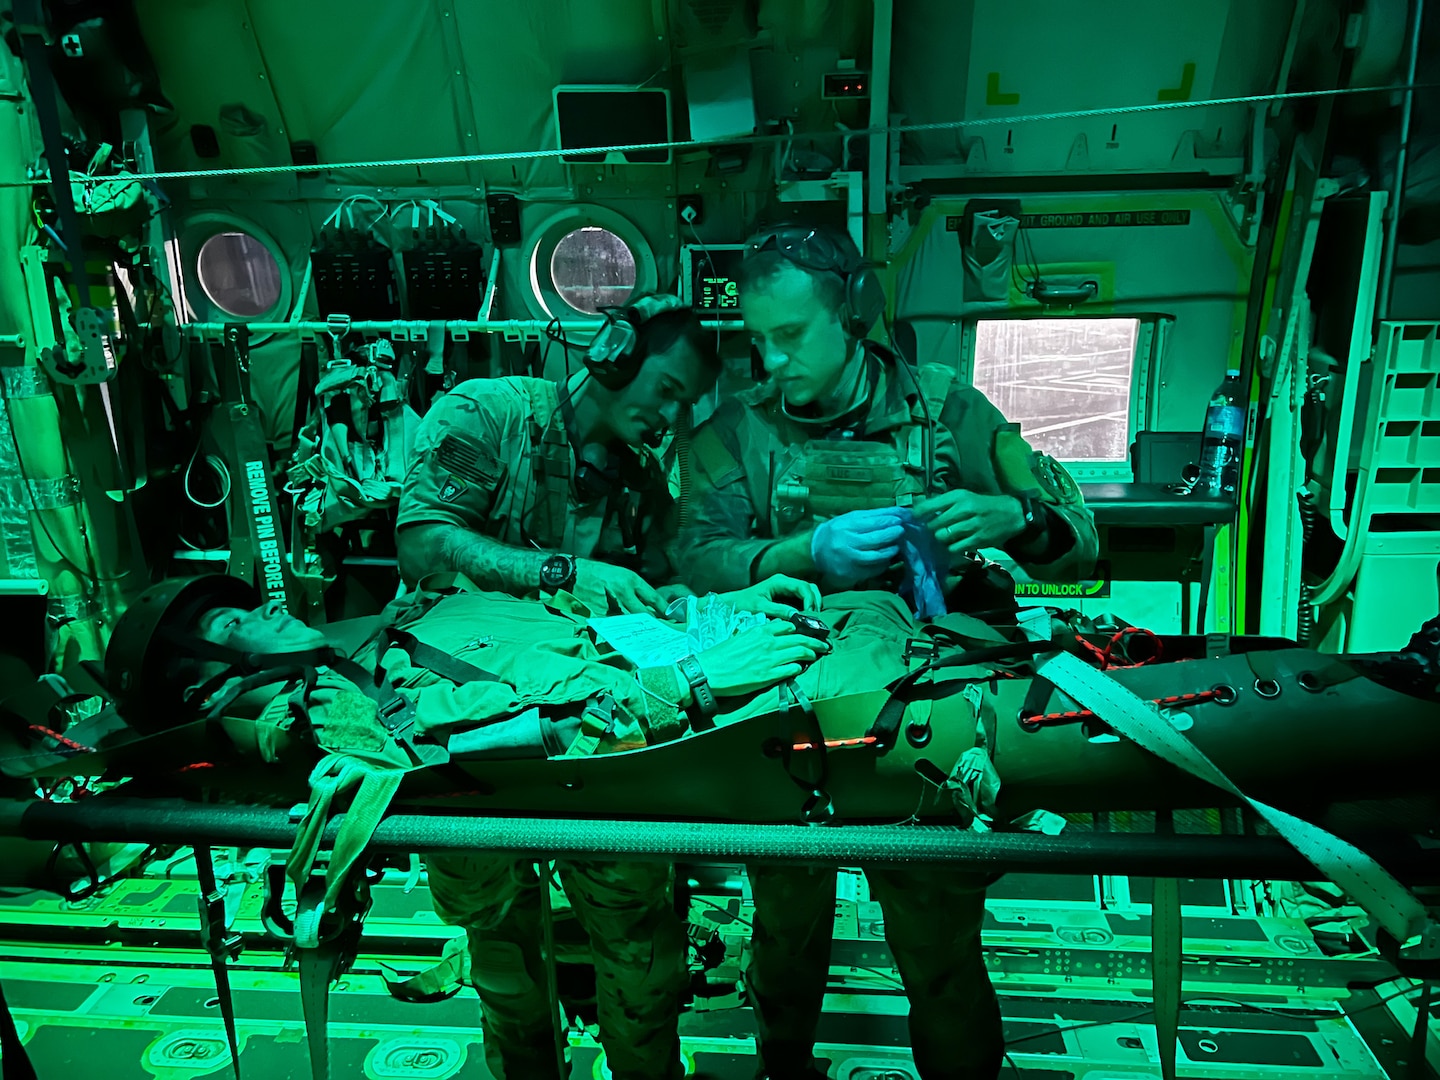 Senior Airman Matt Pluhoeski, right, a pararescue Airman assigned to the 103rd Rescue Squadron of the New York Air National Guard’s 106th Rescue Squadron, works with a Brazilian counterpart on a simulated casualty on board one of the wing’s HC-130 Combat King II search and rescue aircraft during a medical evacuation mission as part of Exercise Tapio in Campo Grande, Brazil, Aug. 24, 2022. The New York Air National Guard sent 100 personnel to participate in the exercise as part of the New York National Guard State Partnership Program relationship with Brazil.